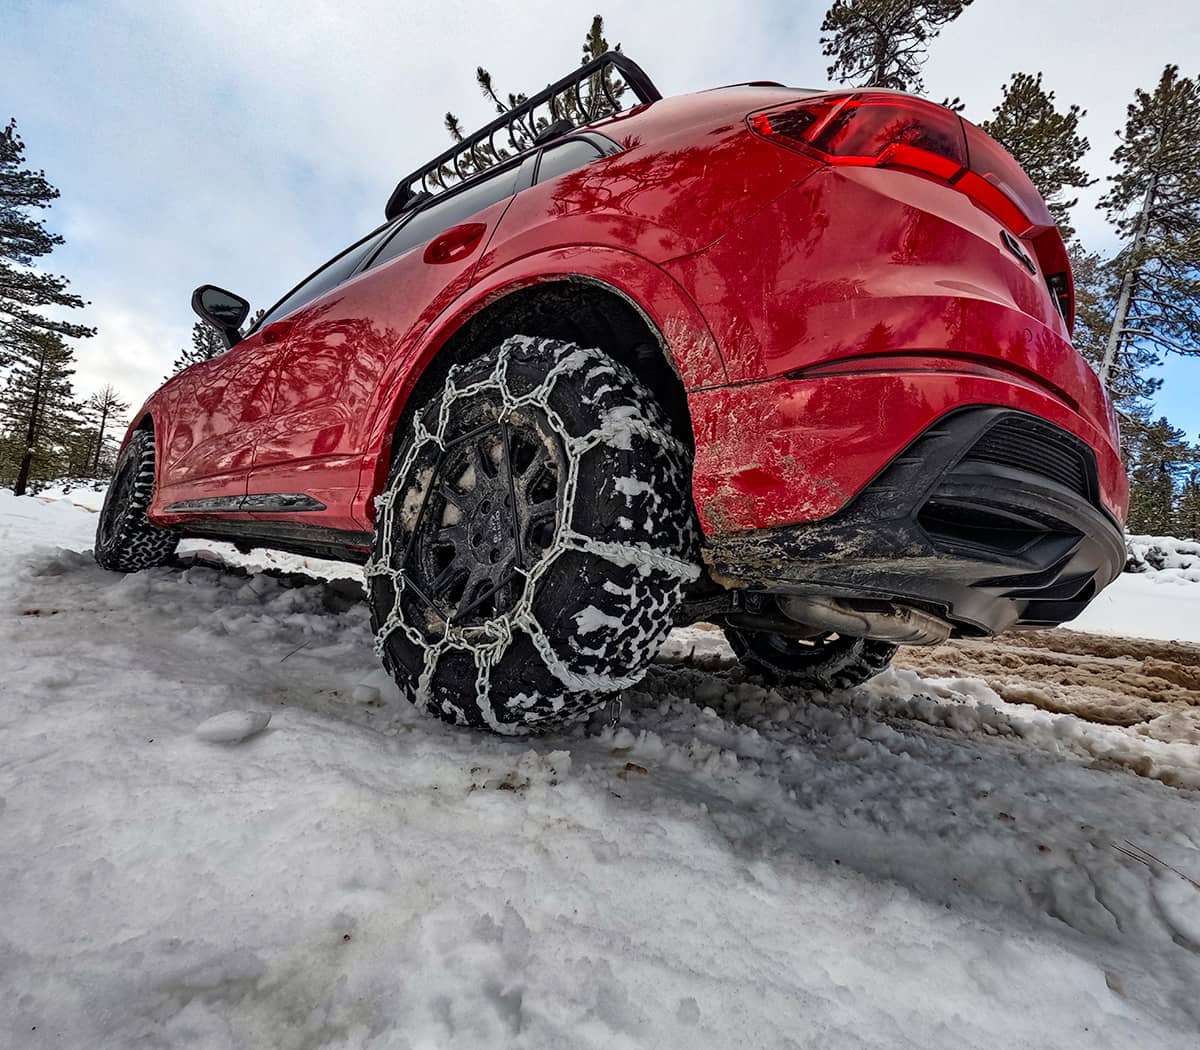 Audi Q3 S-line with snow chains on rear wheels to drive uphill in the snow